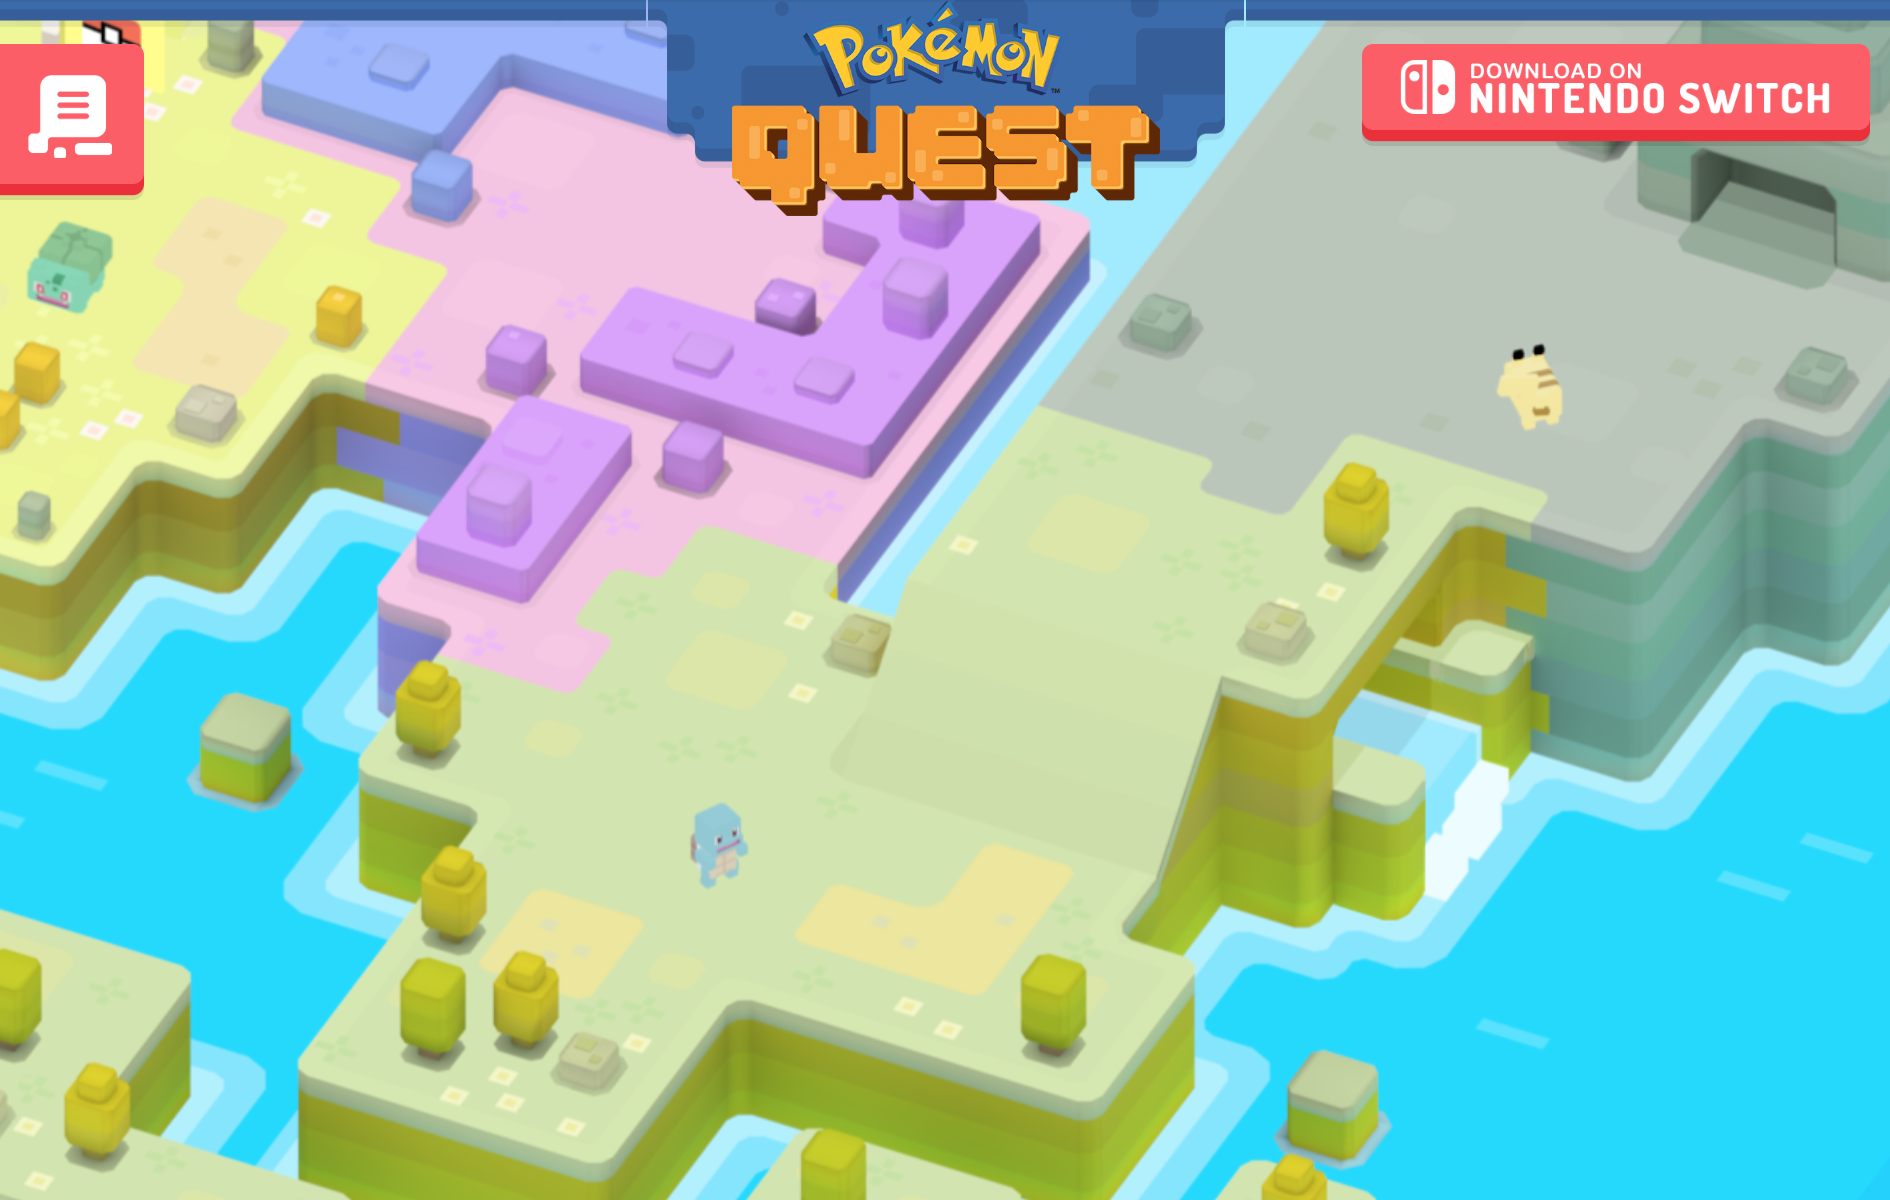 Pokémon Quest Hits The Nintendo Switch With Two More Pokémon